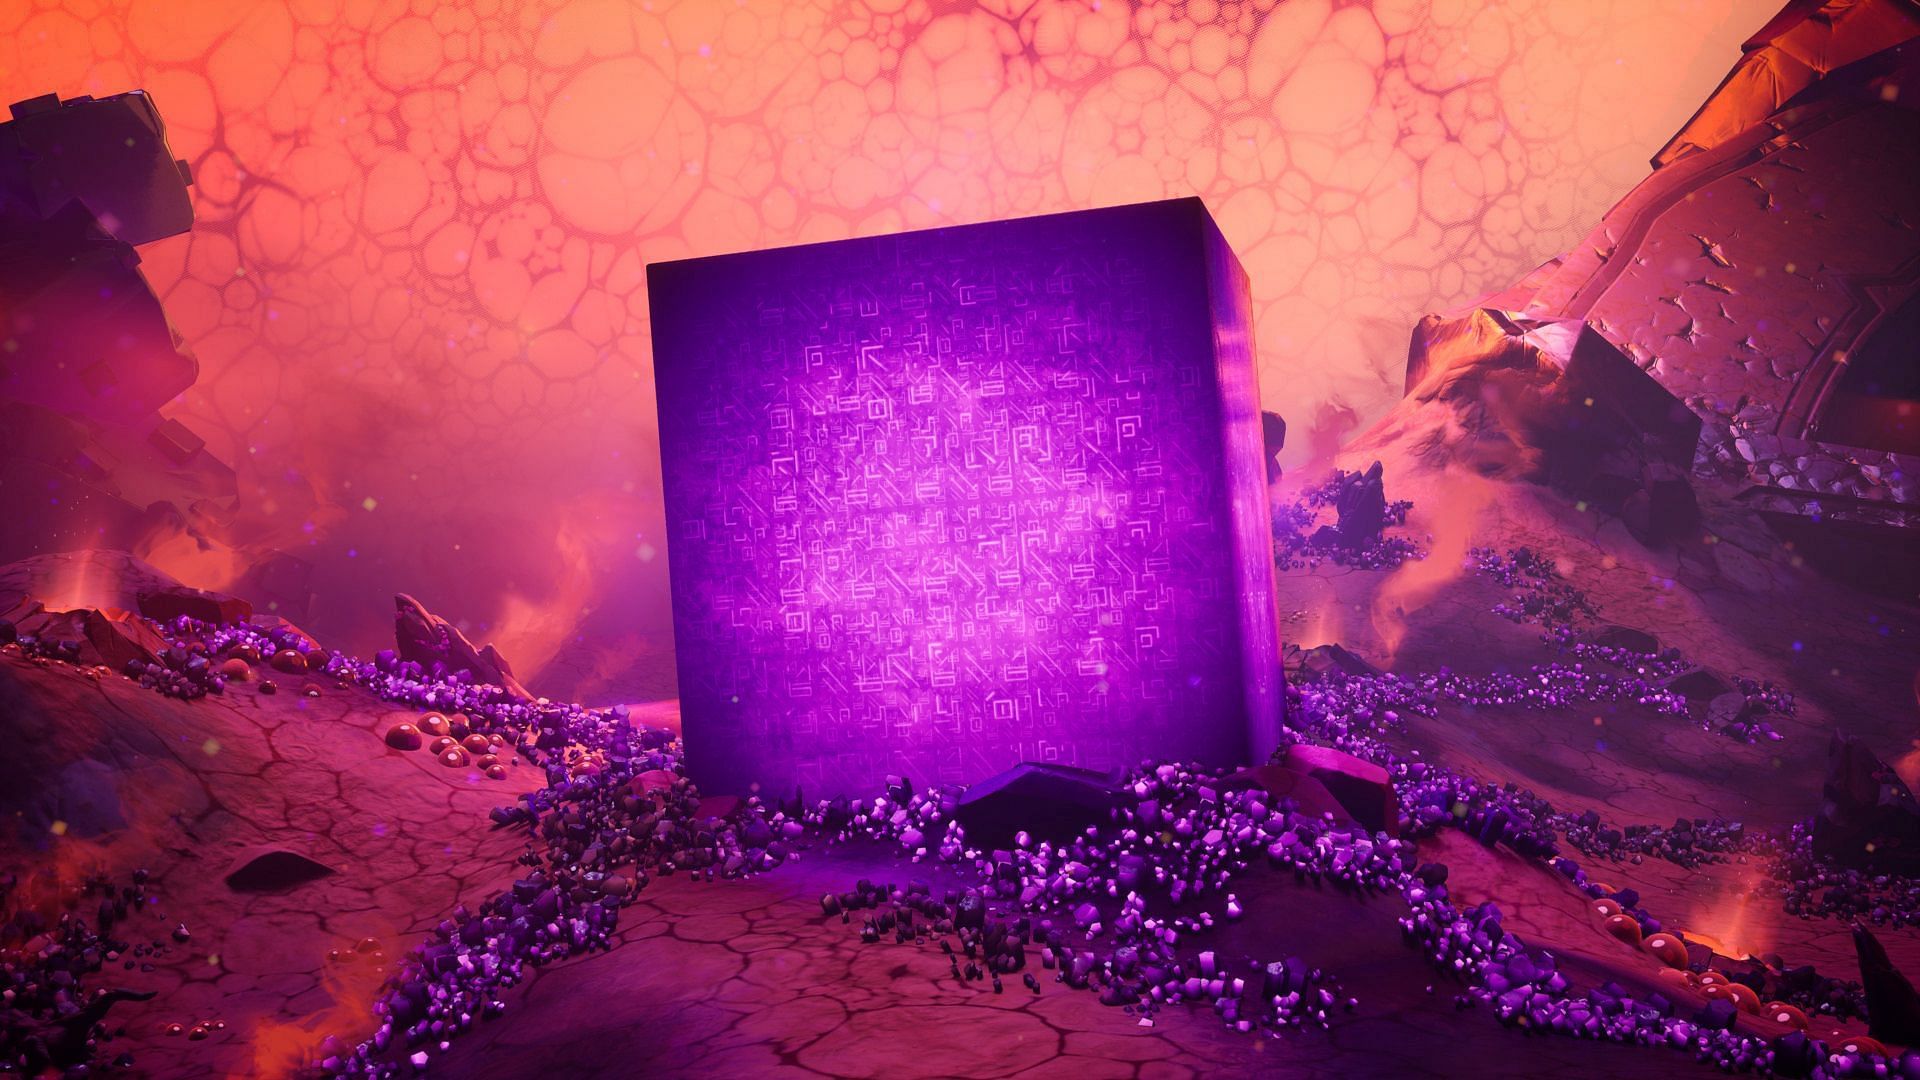 Cubes were the initial source of the corruption in Fortnite (Image via Epic Games)